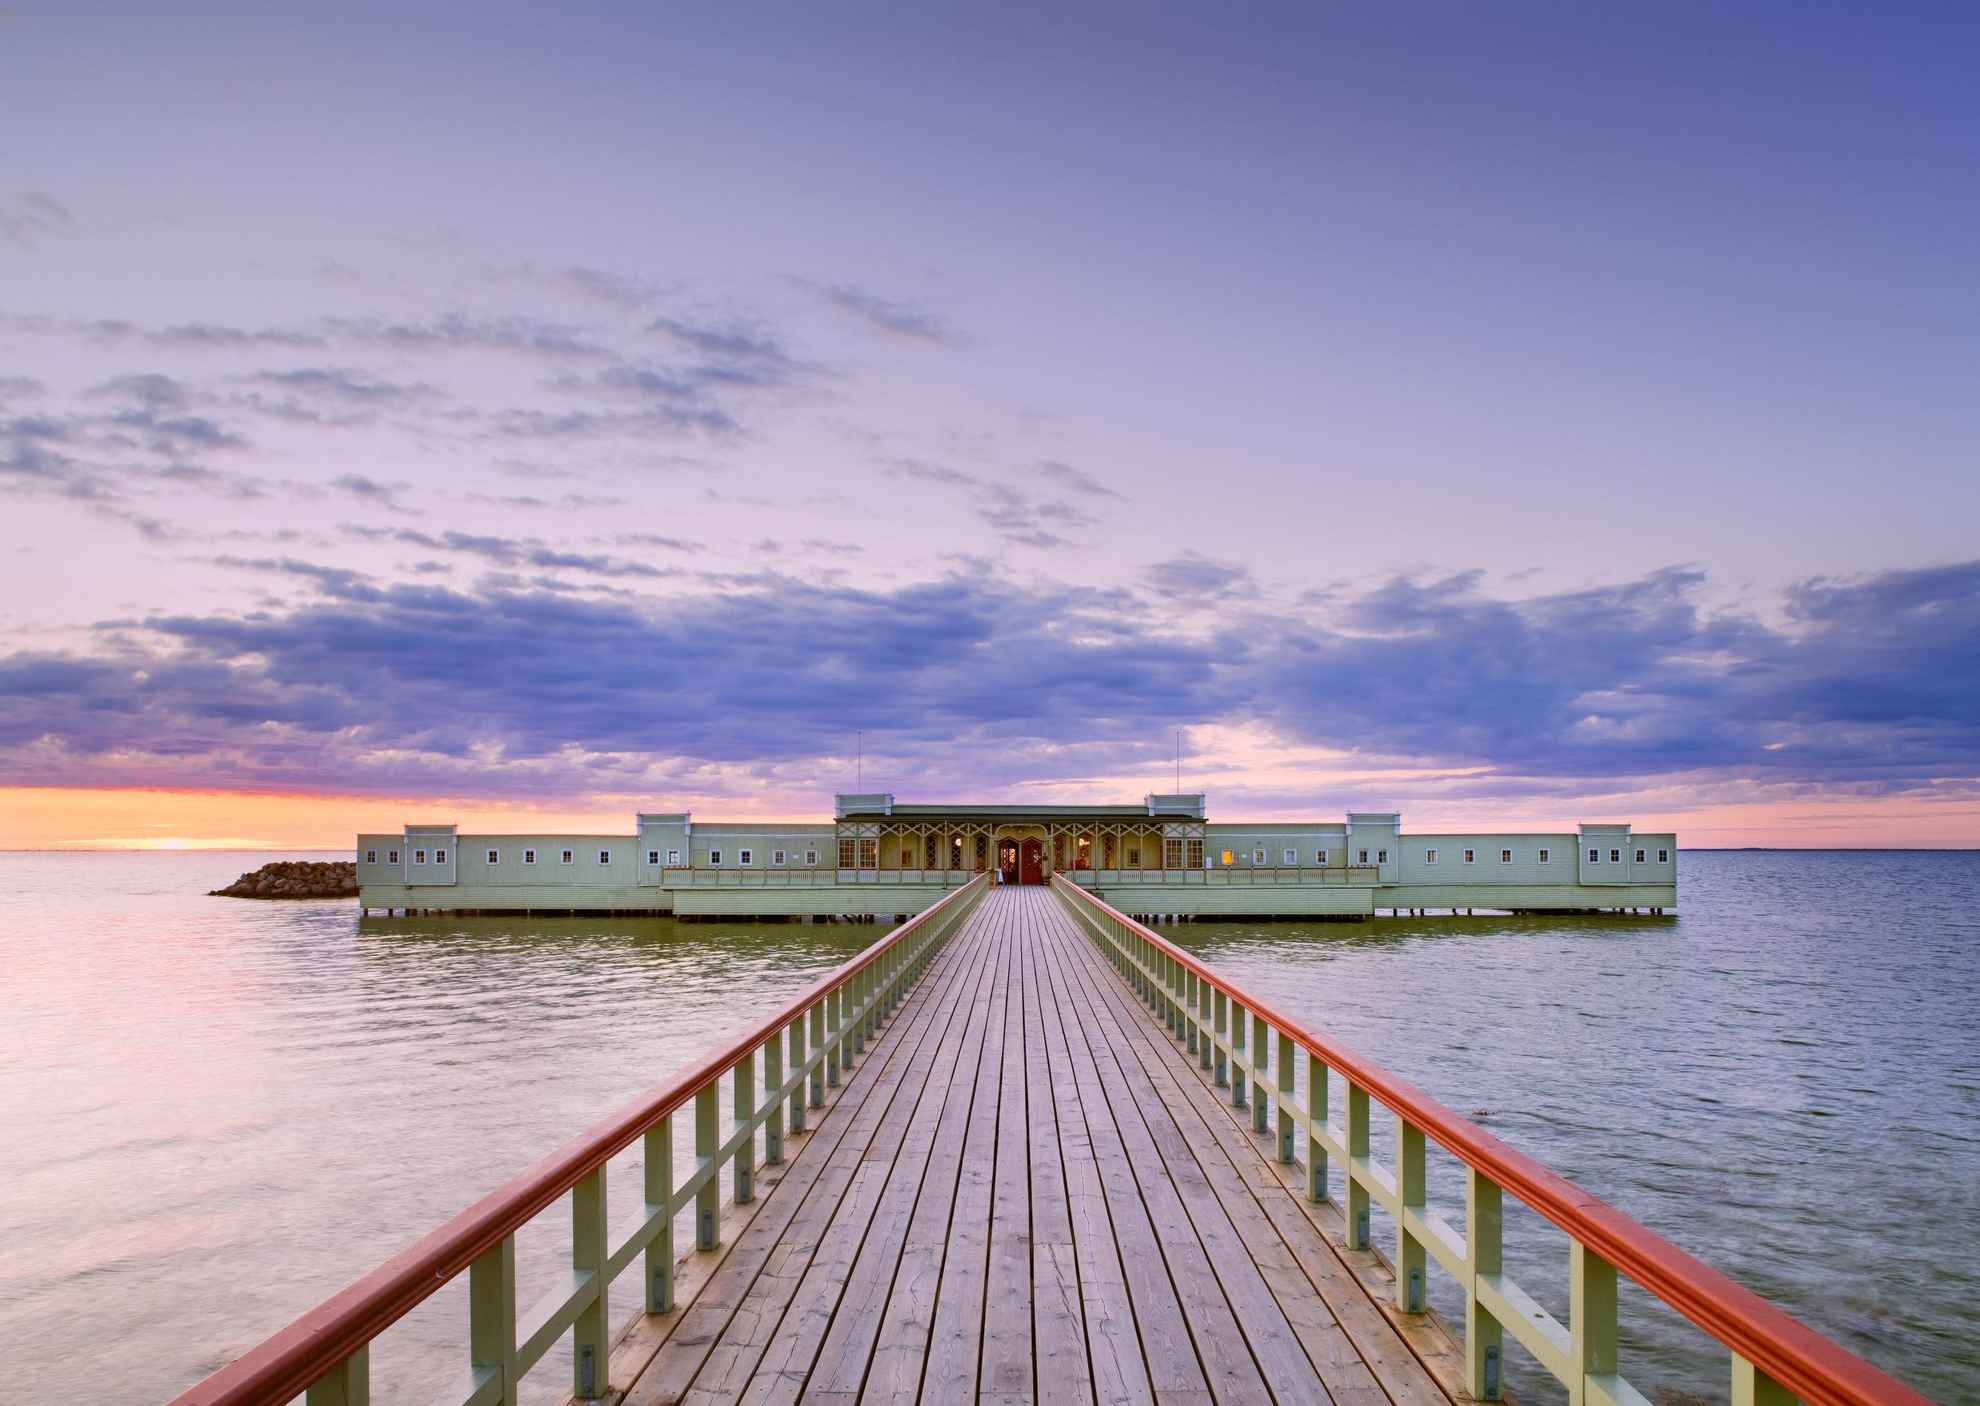 A long jetty in the water leading to a green open-air cold bath house.